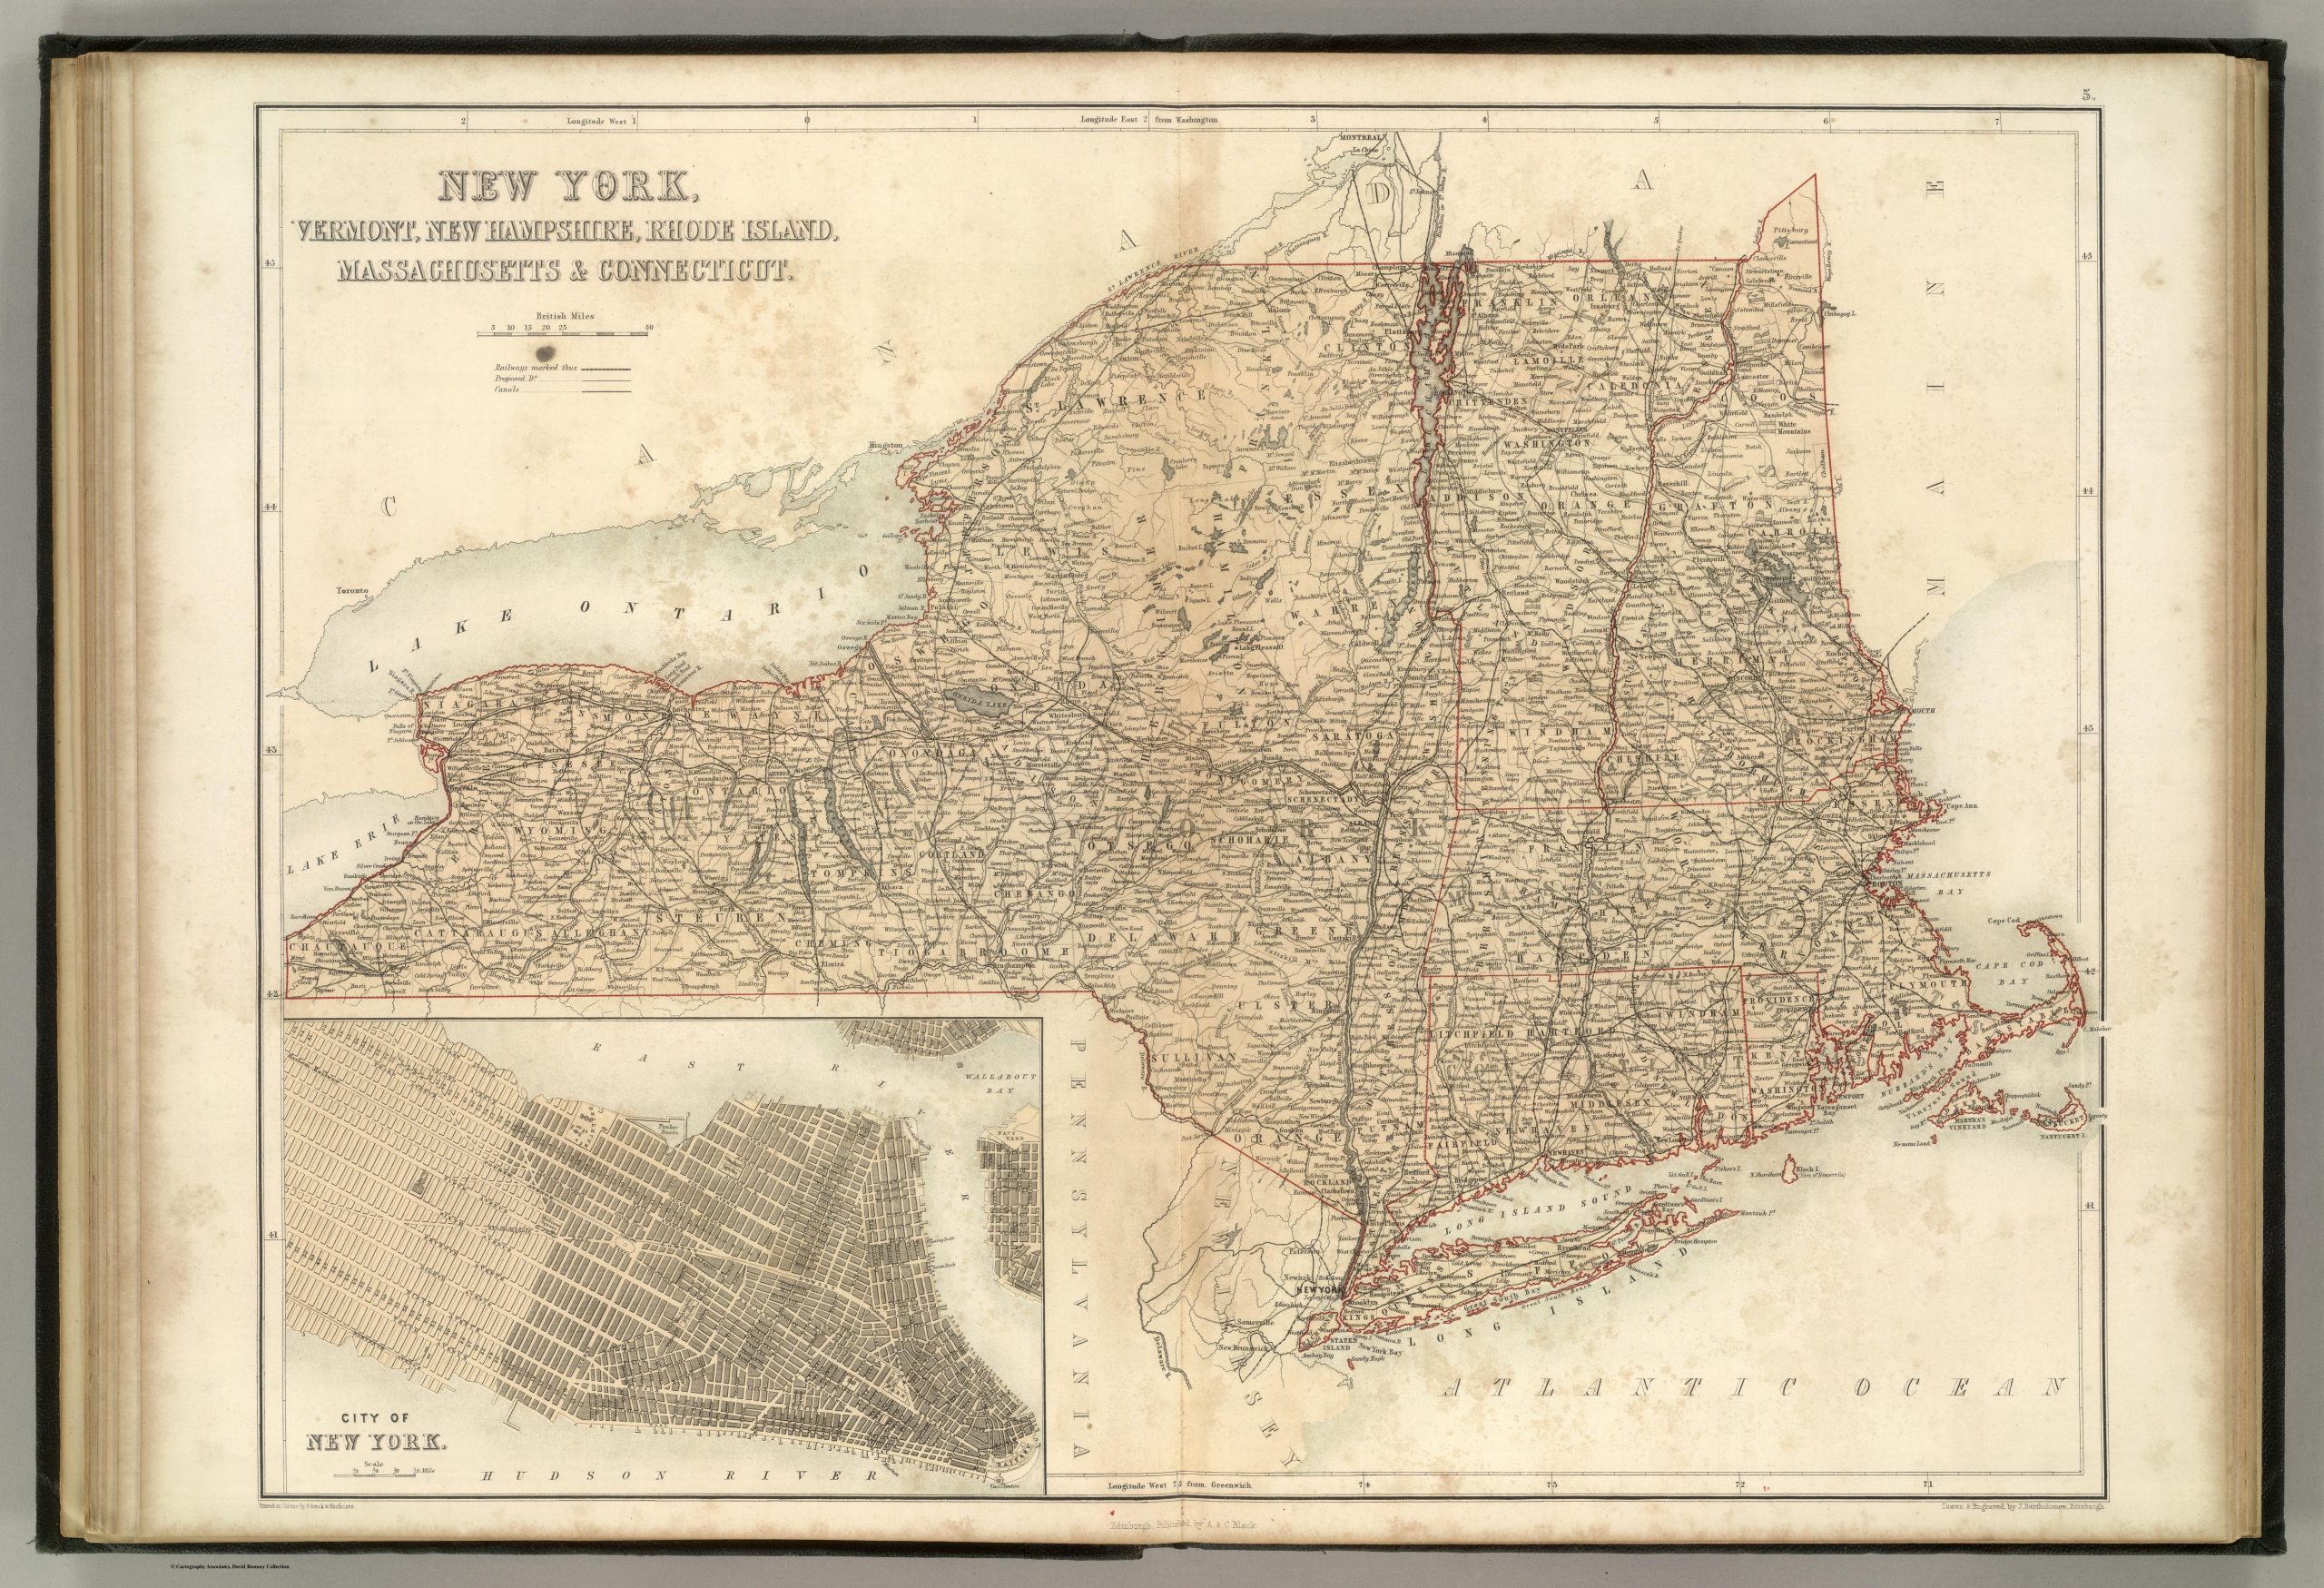 Aged map of New York State in 1856.